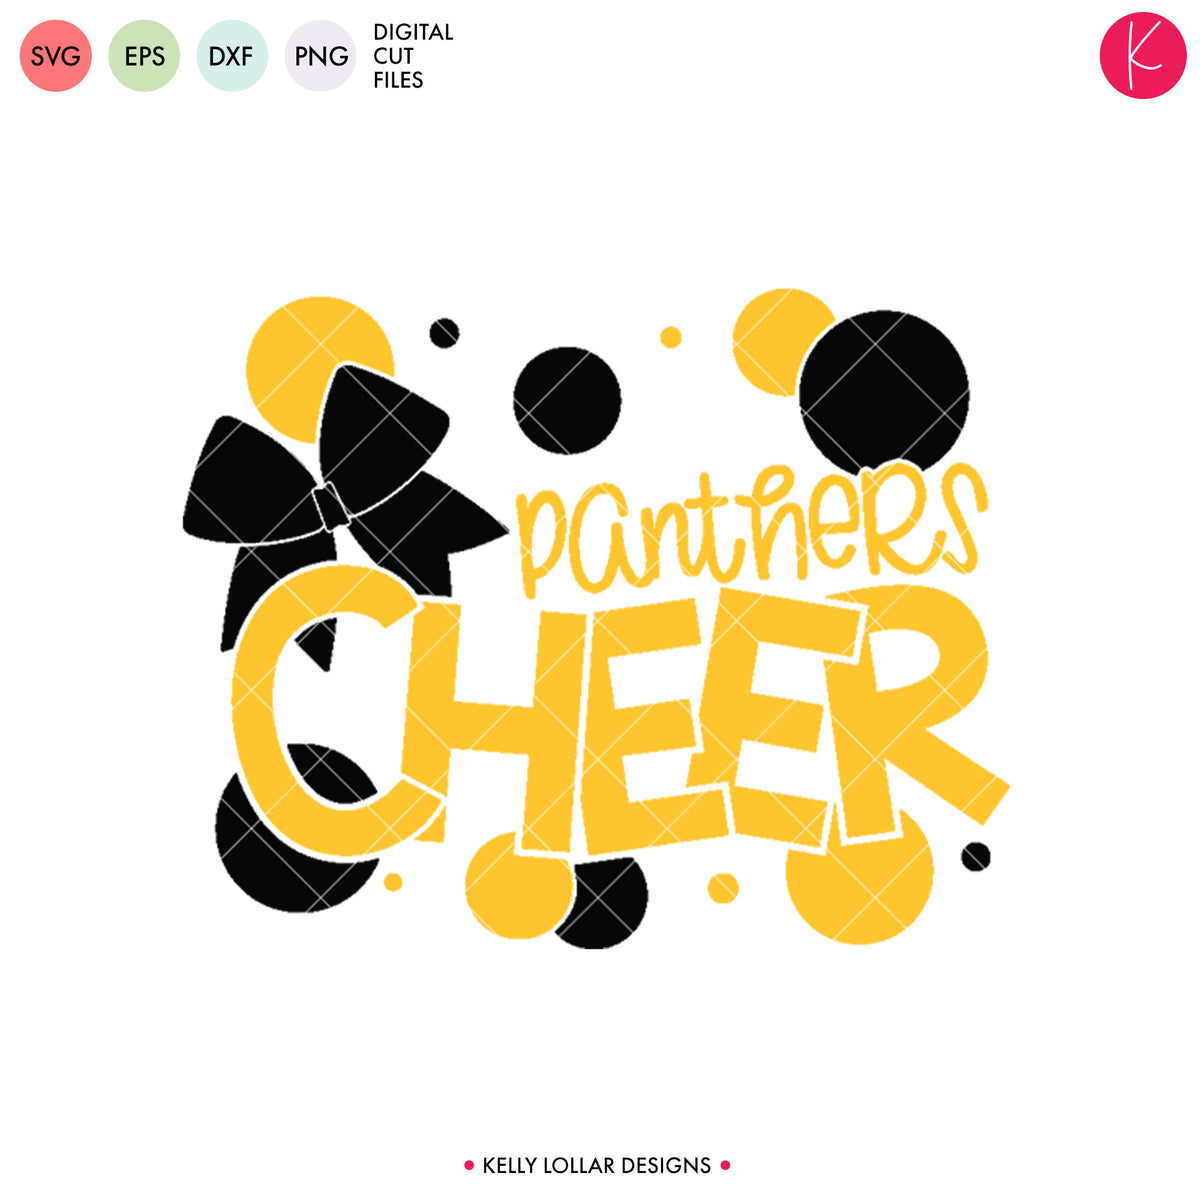 Panthers Cheer Bundle | SVG DXF EPS PNG Cut Files